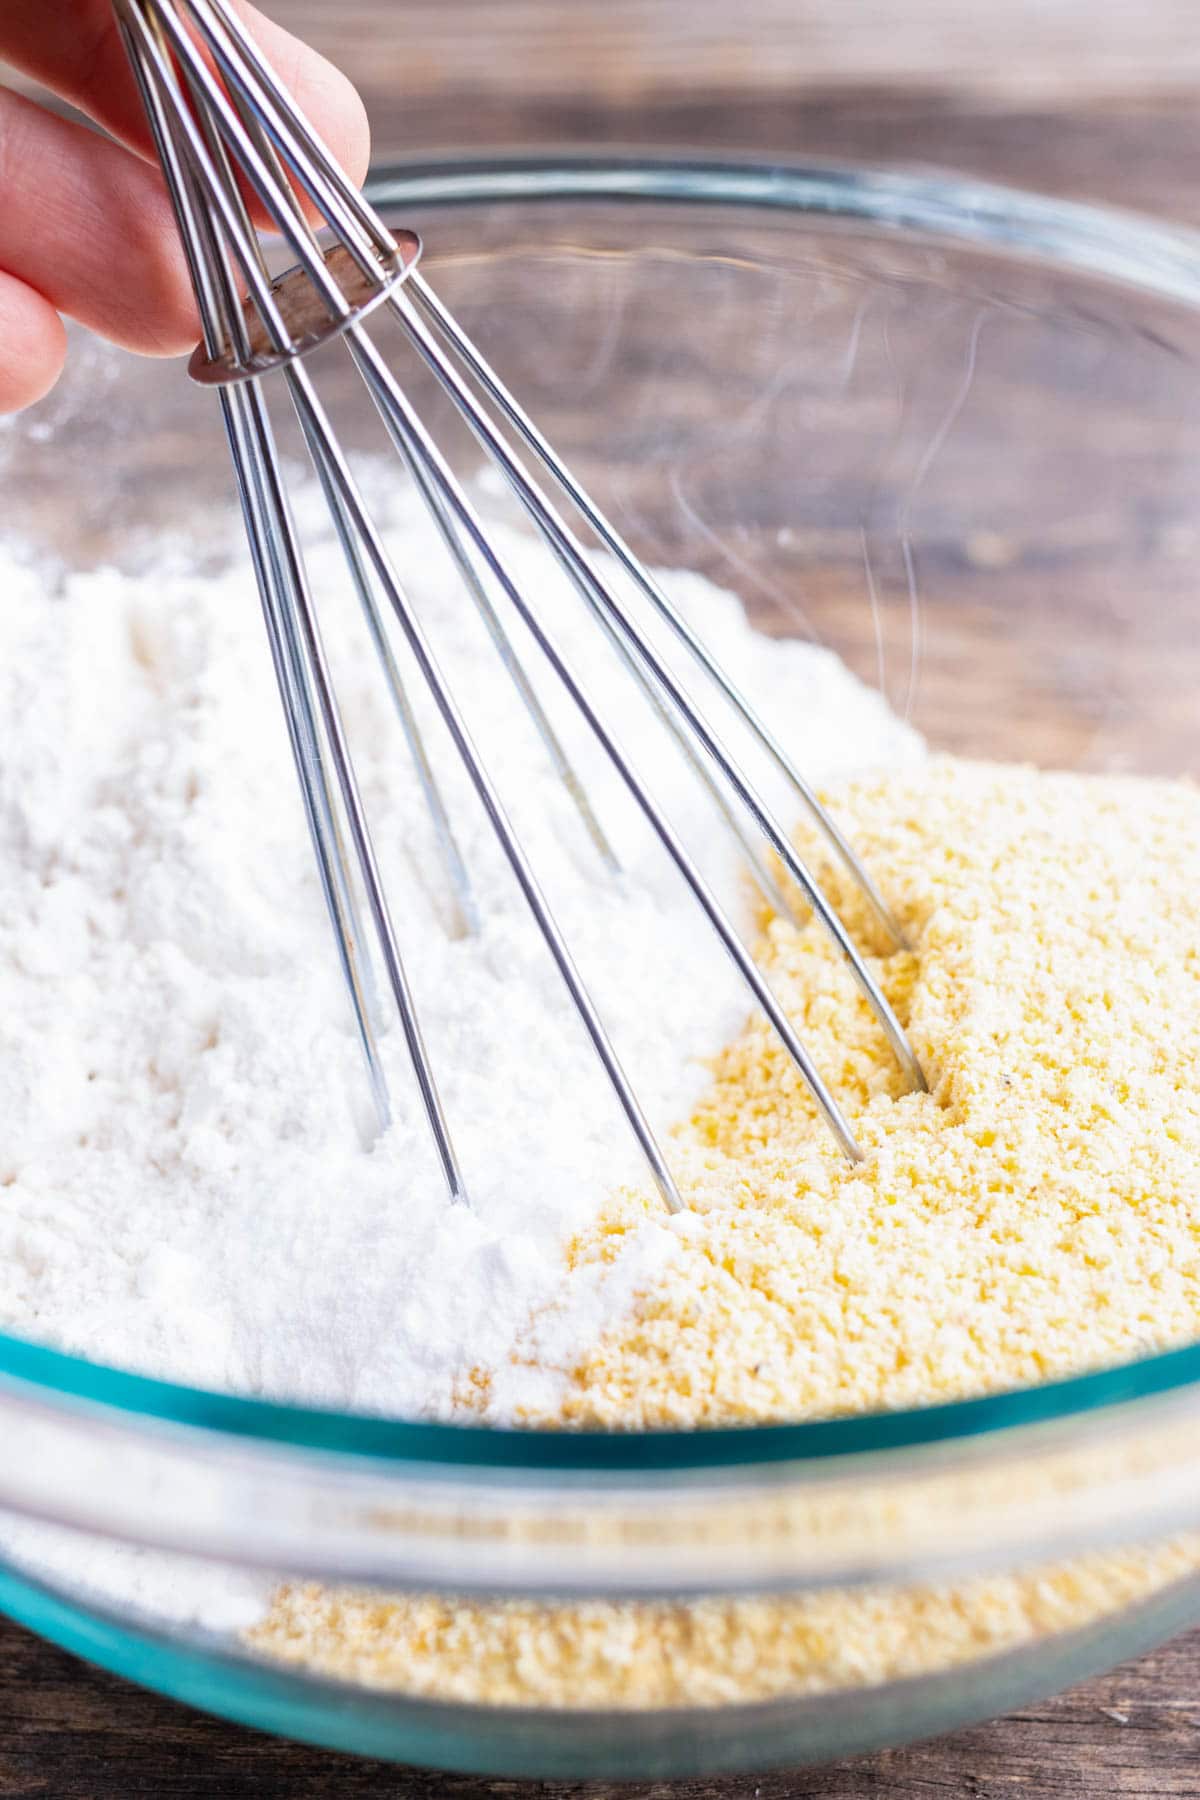 Dry ingredients being whisked together.